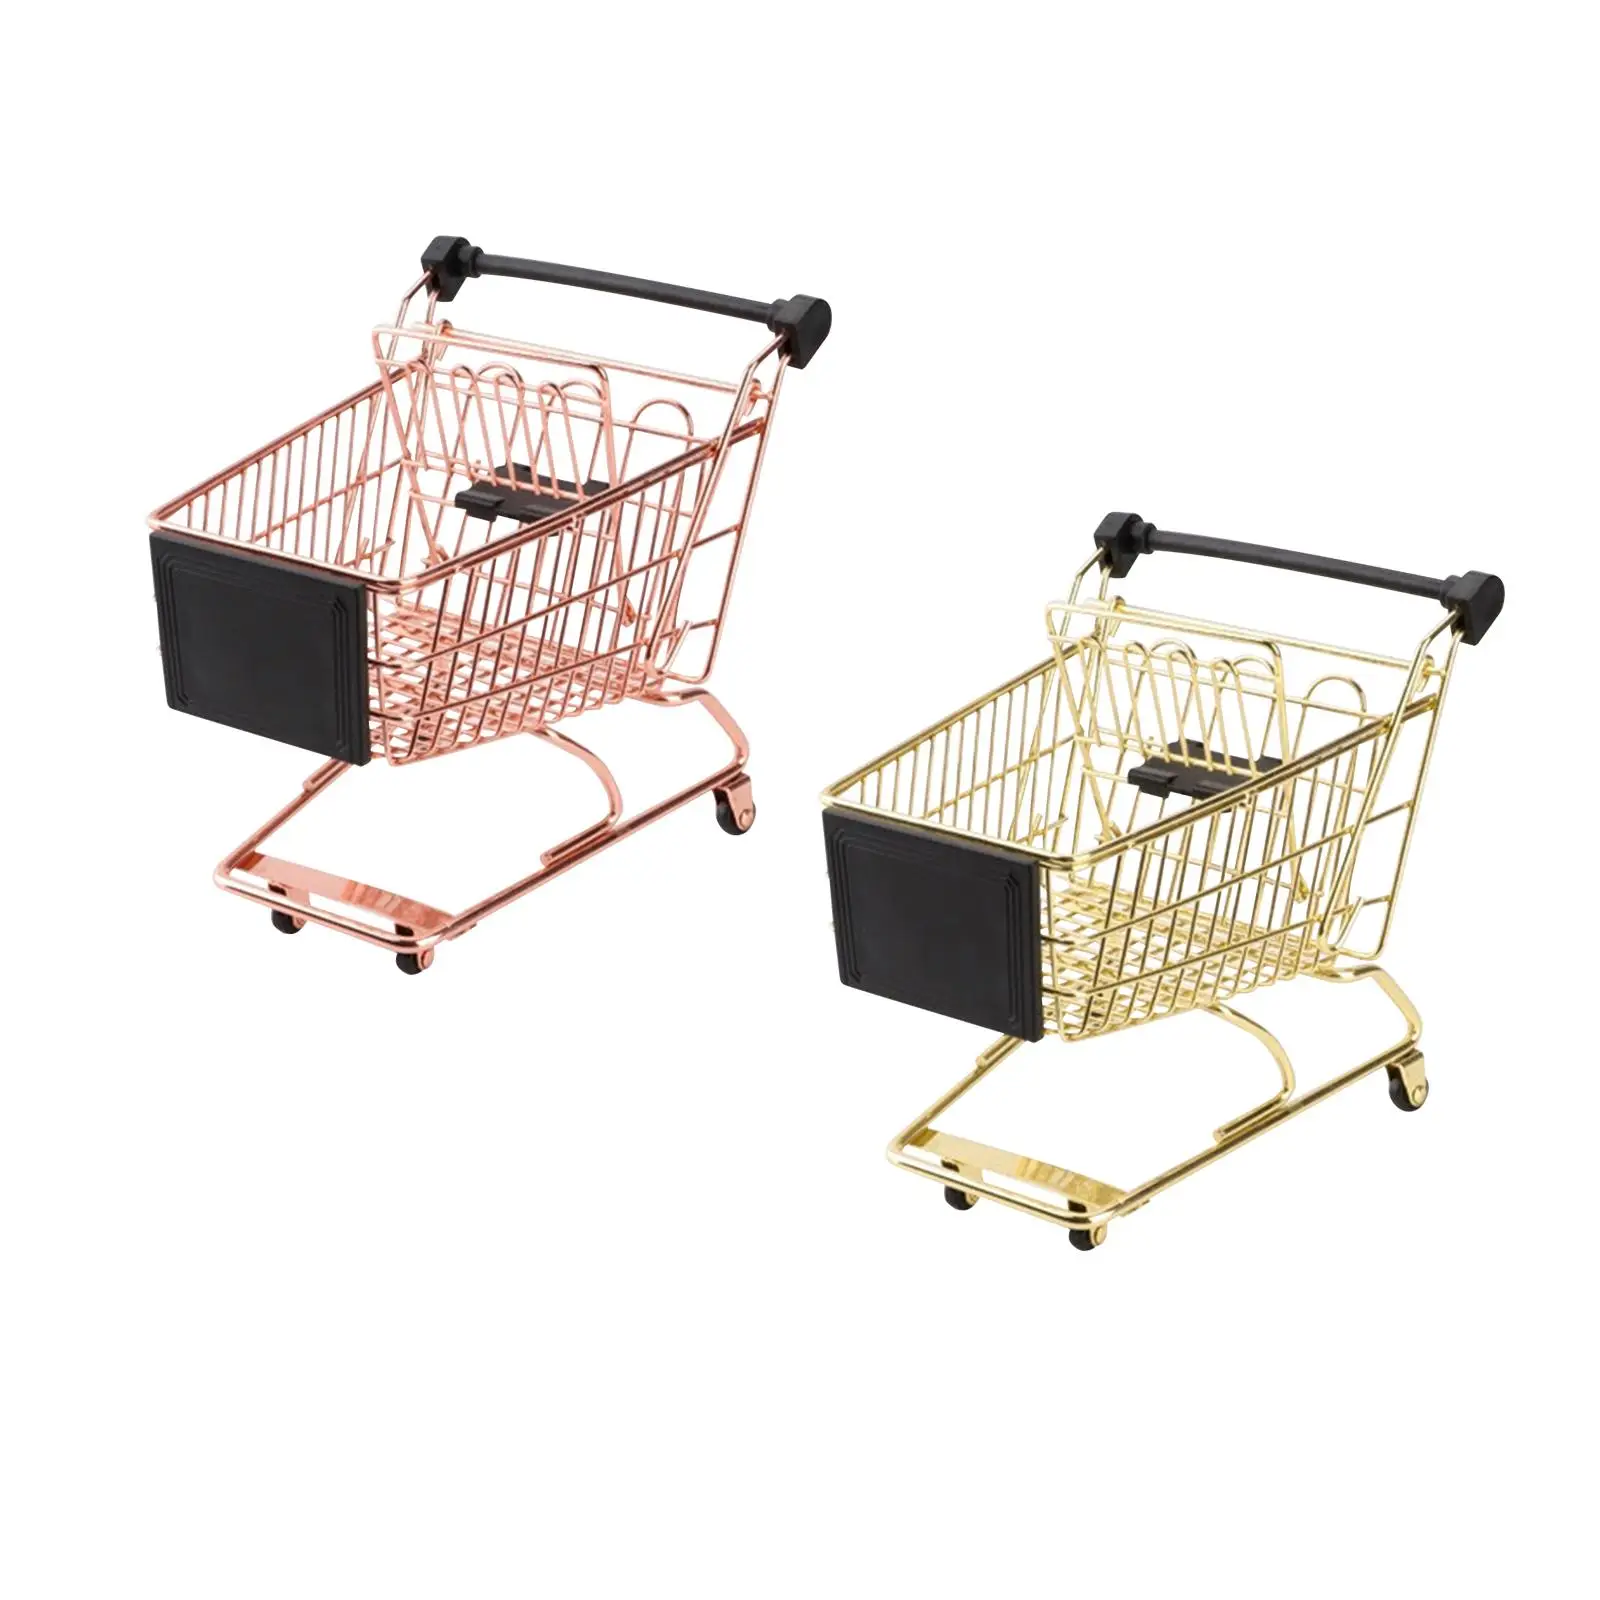 Mini Shopping Cart Party Favors Birthday Gift Learning Development Photo Props Simulation Shopping Cart for Kids Girl Boy Toys